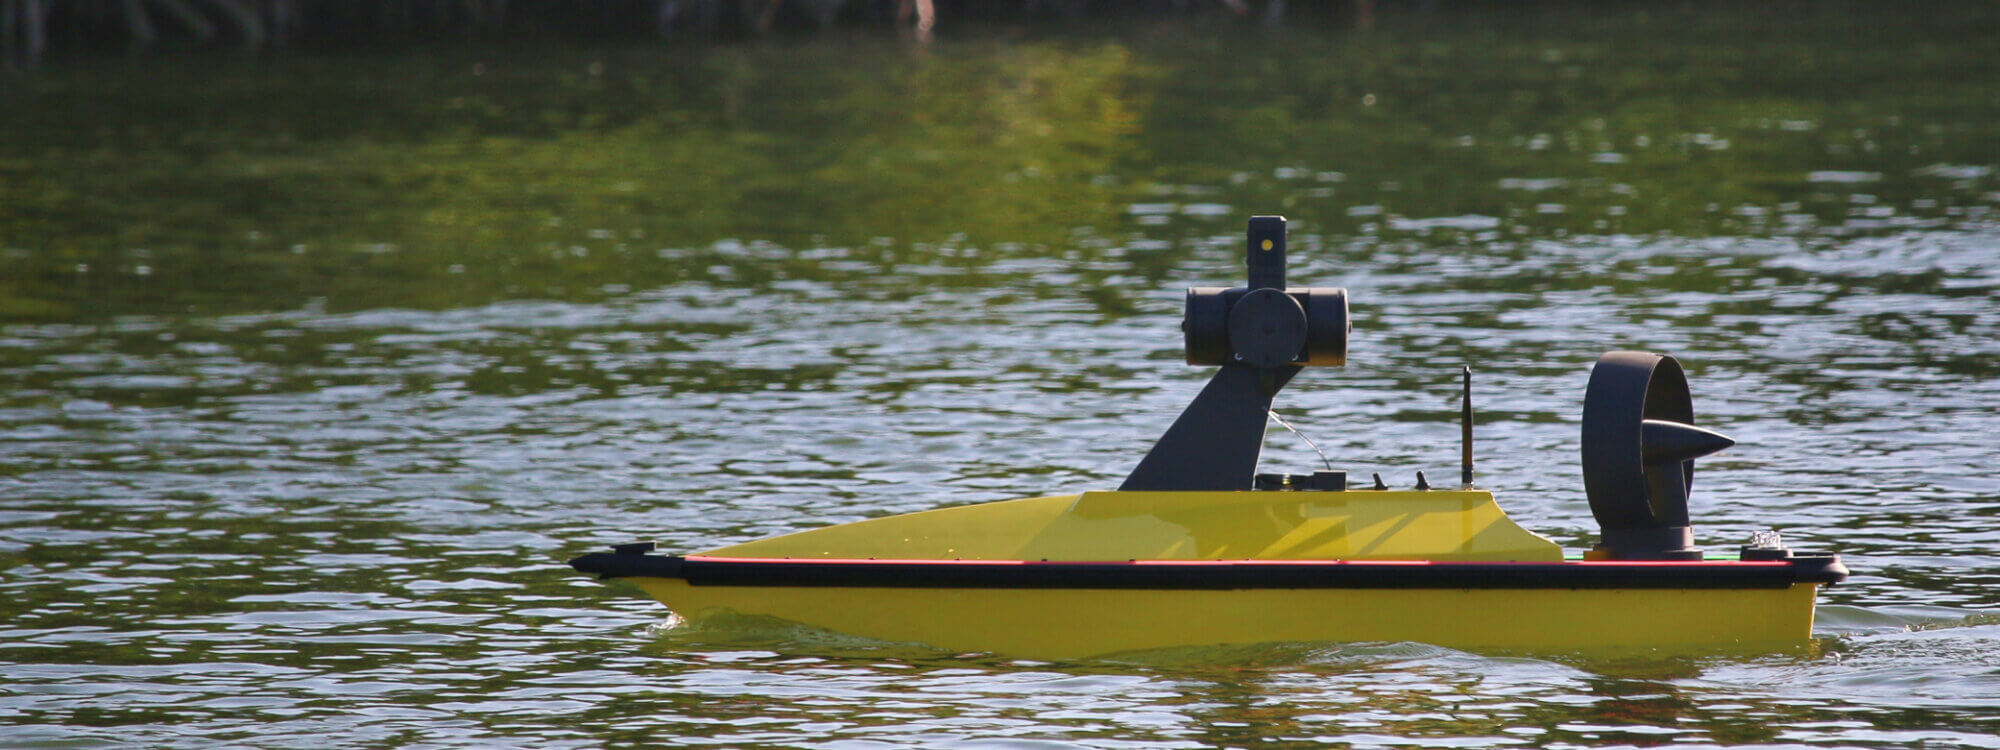 Marine drones manufactured using Crestapol<sup>®</sup> and Crestabond<sup>®</sup> help protect marine environments